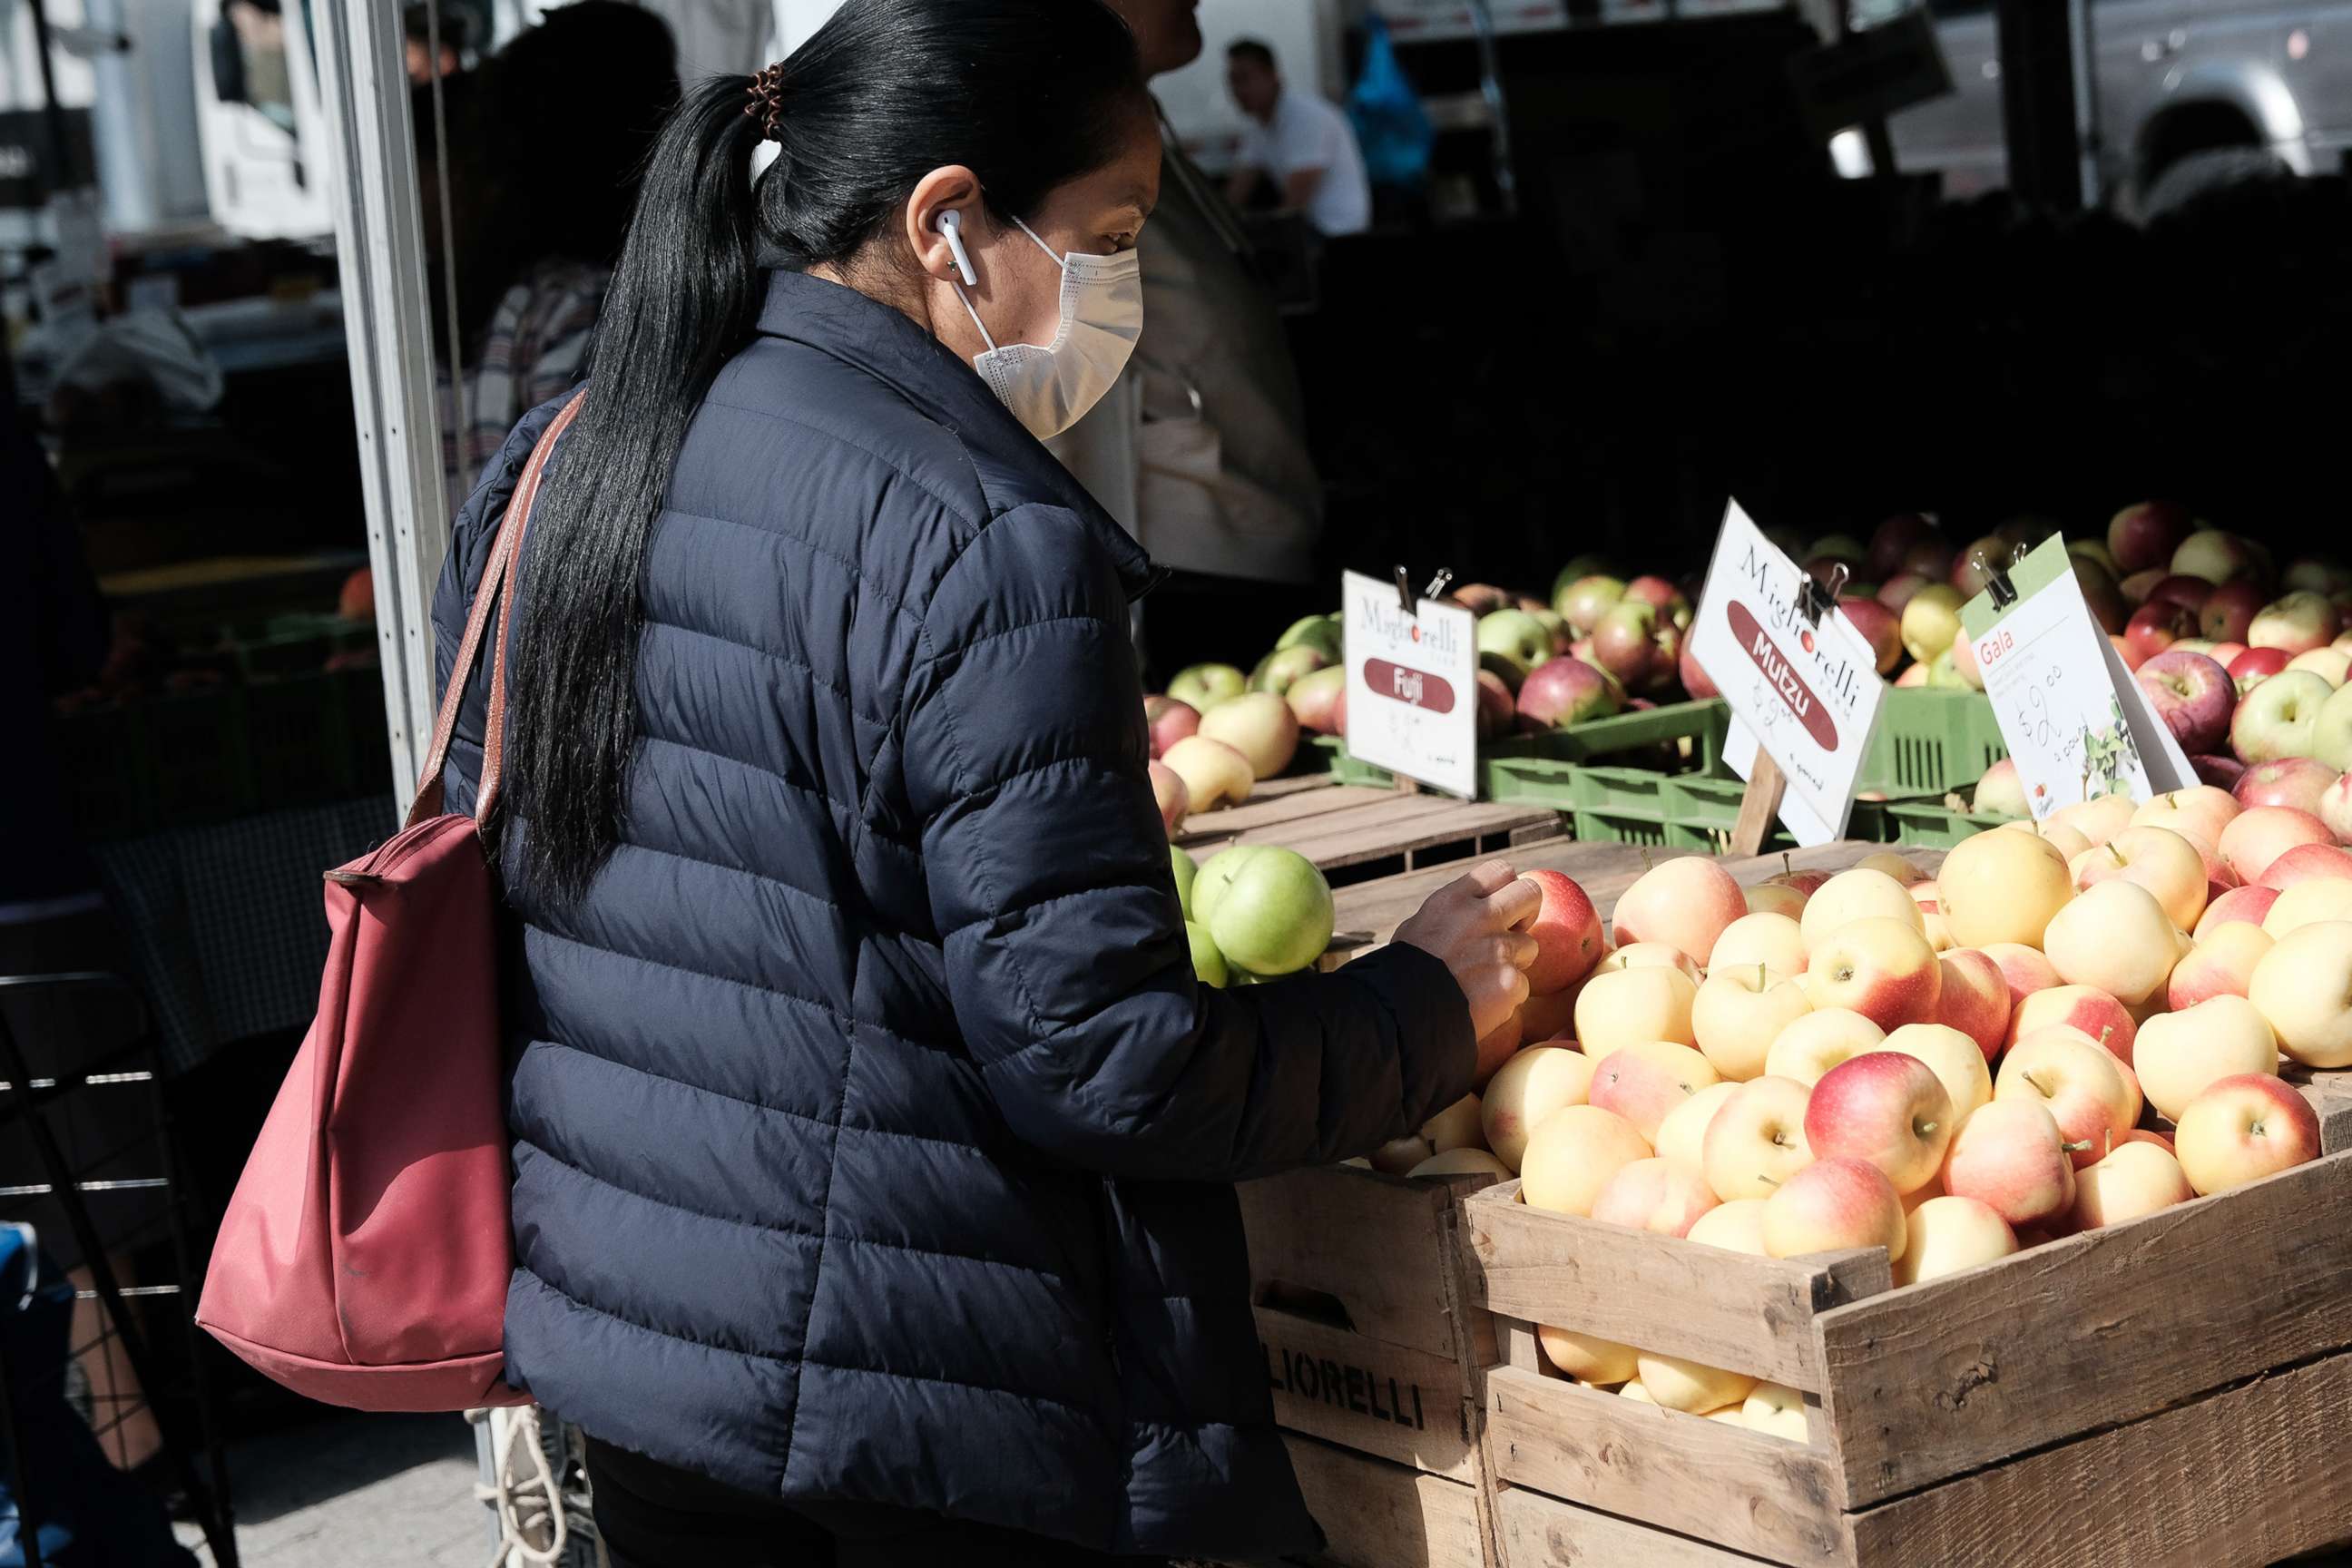 PHOTO: People shop for fresh produce in a farmers market in New York, Sept. 29, 2021.